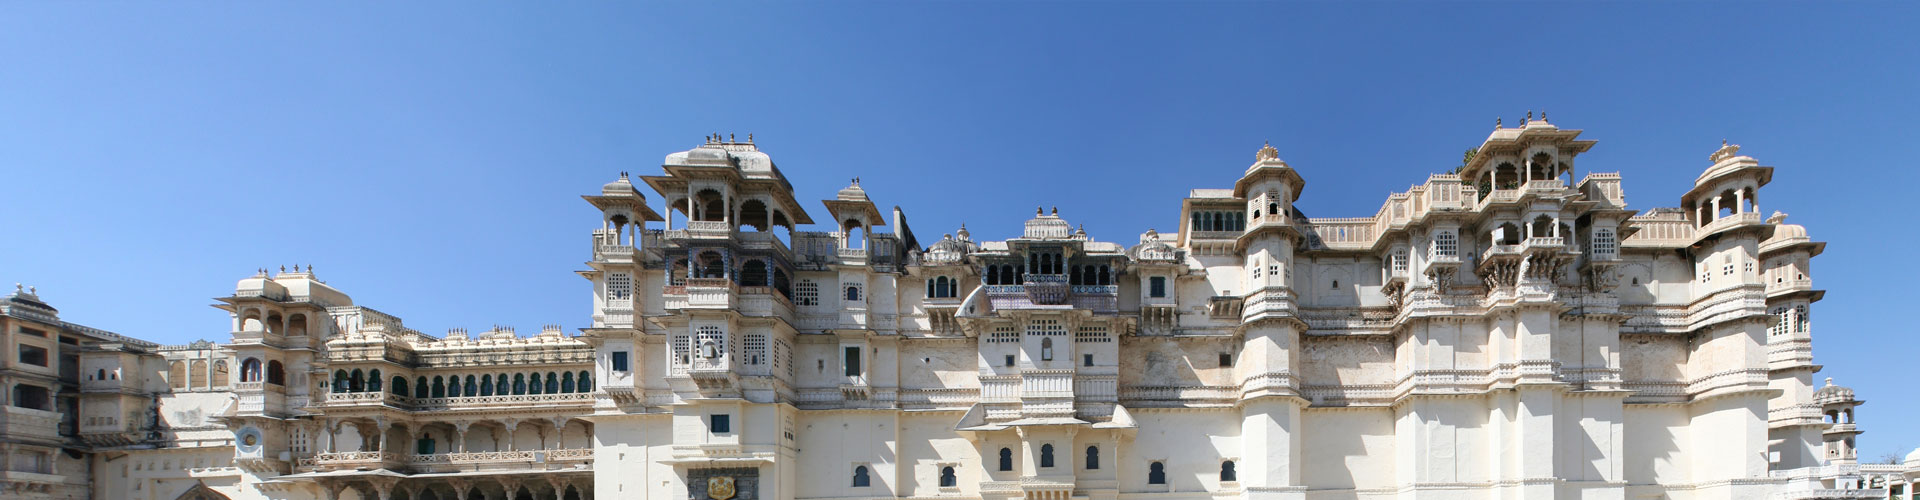 udaipur city tour package